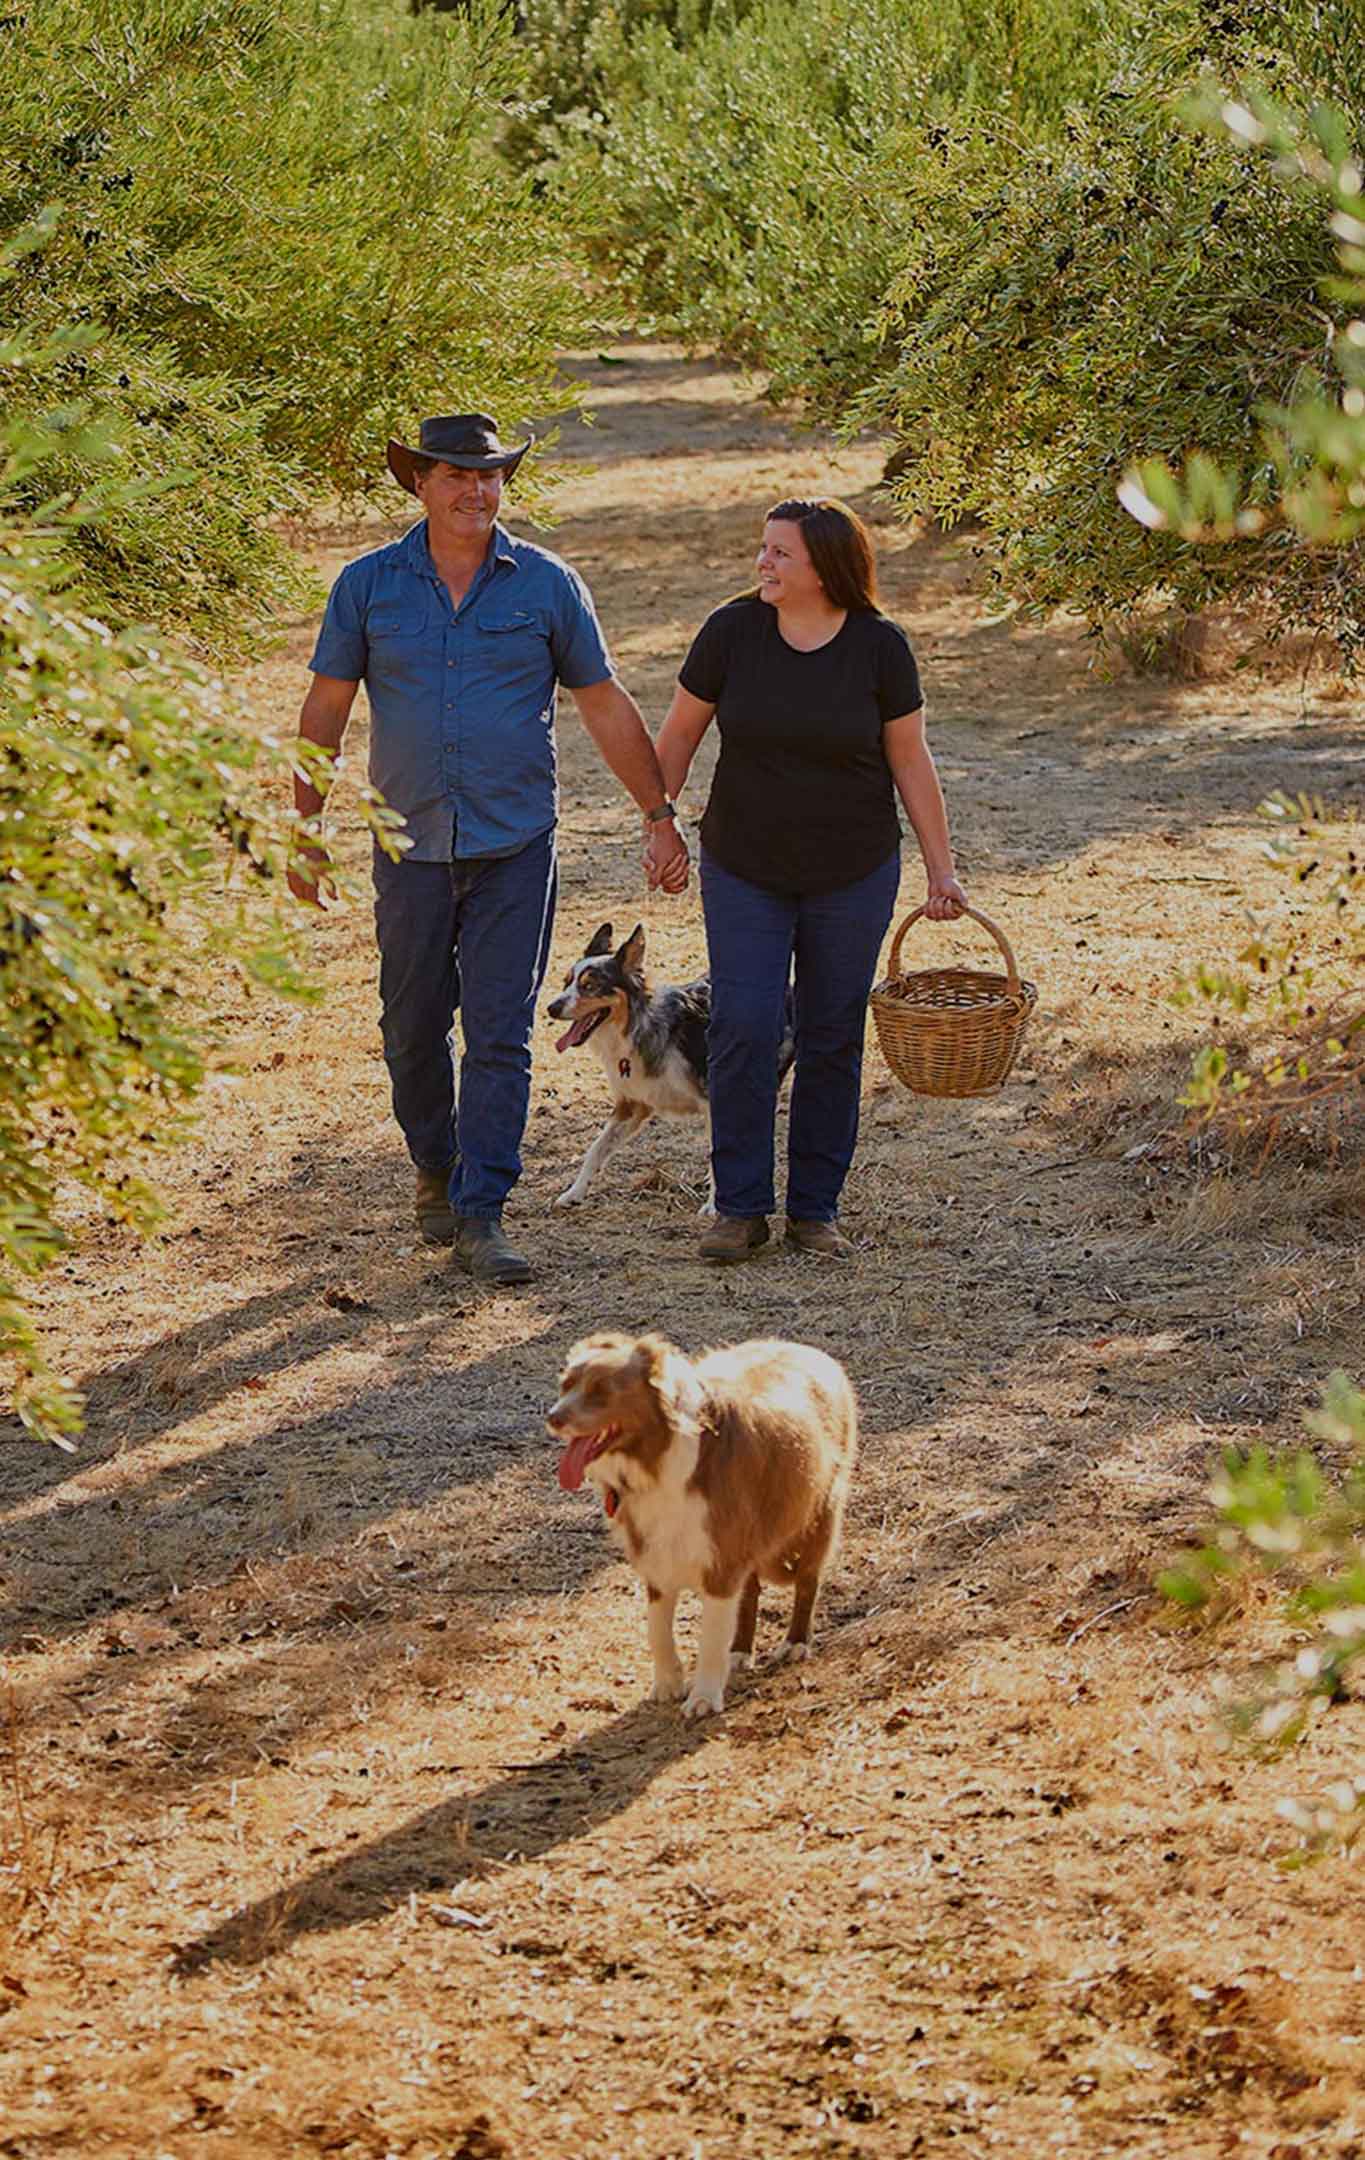 Alyssa, Michael and the dogs olive picking